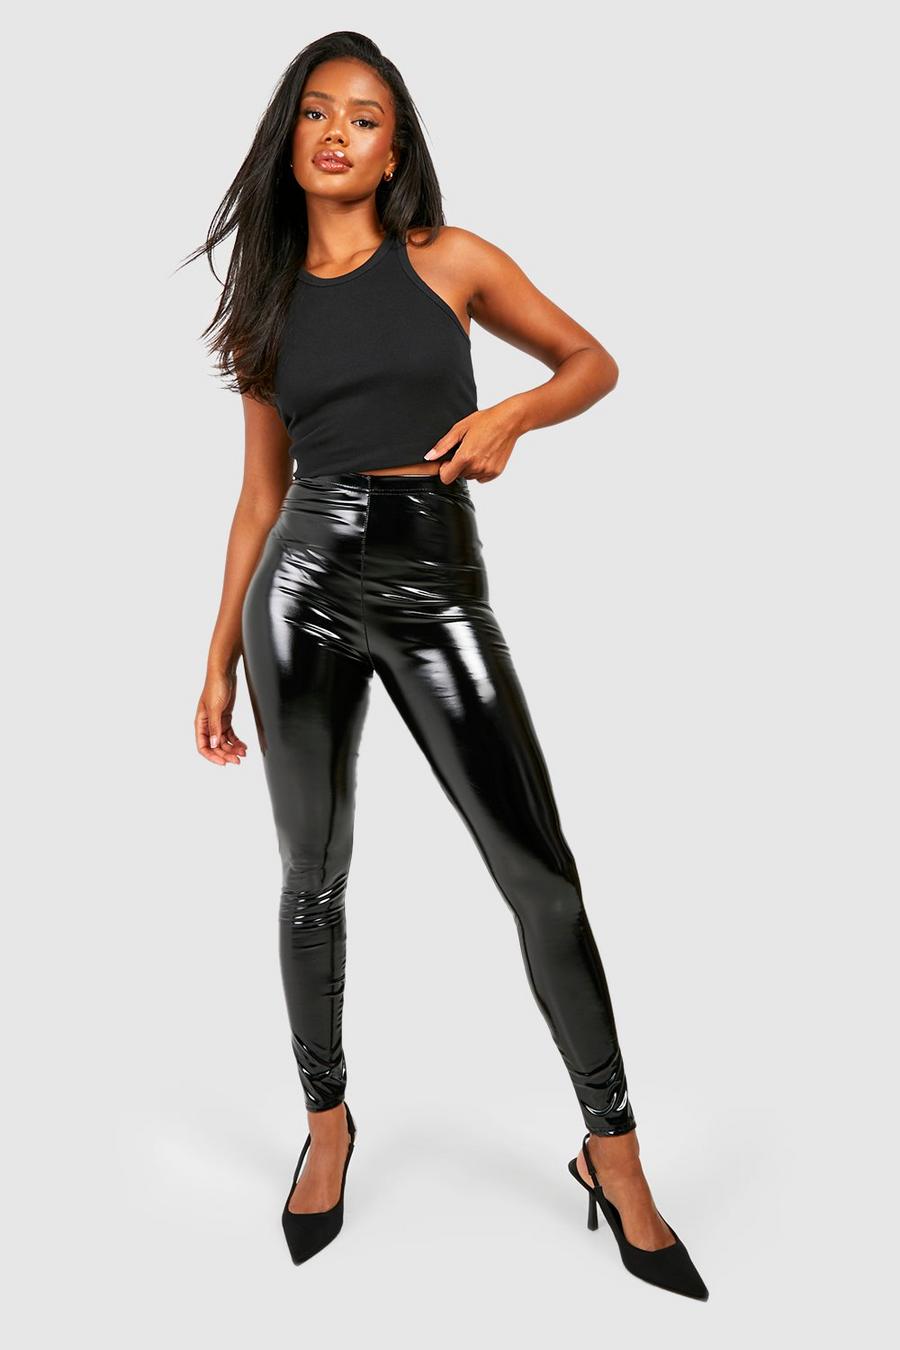 vinyl leggings women, vinyl leggings women Suppliers and